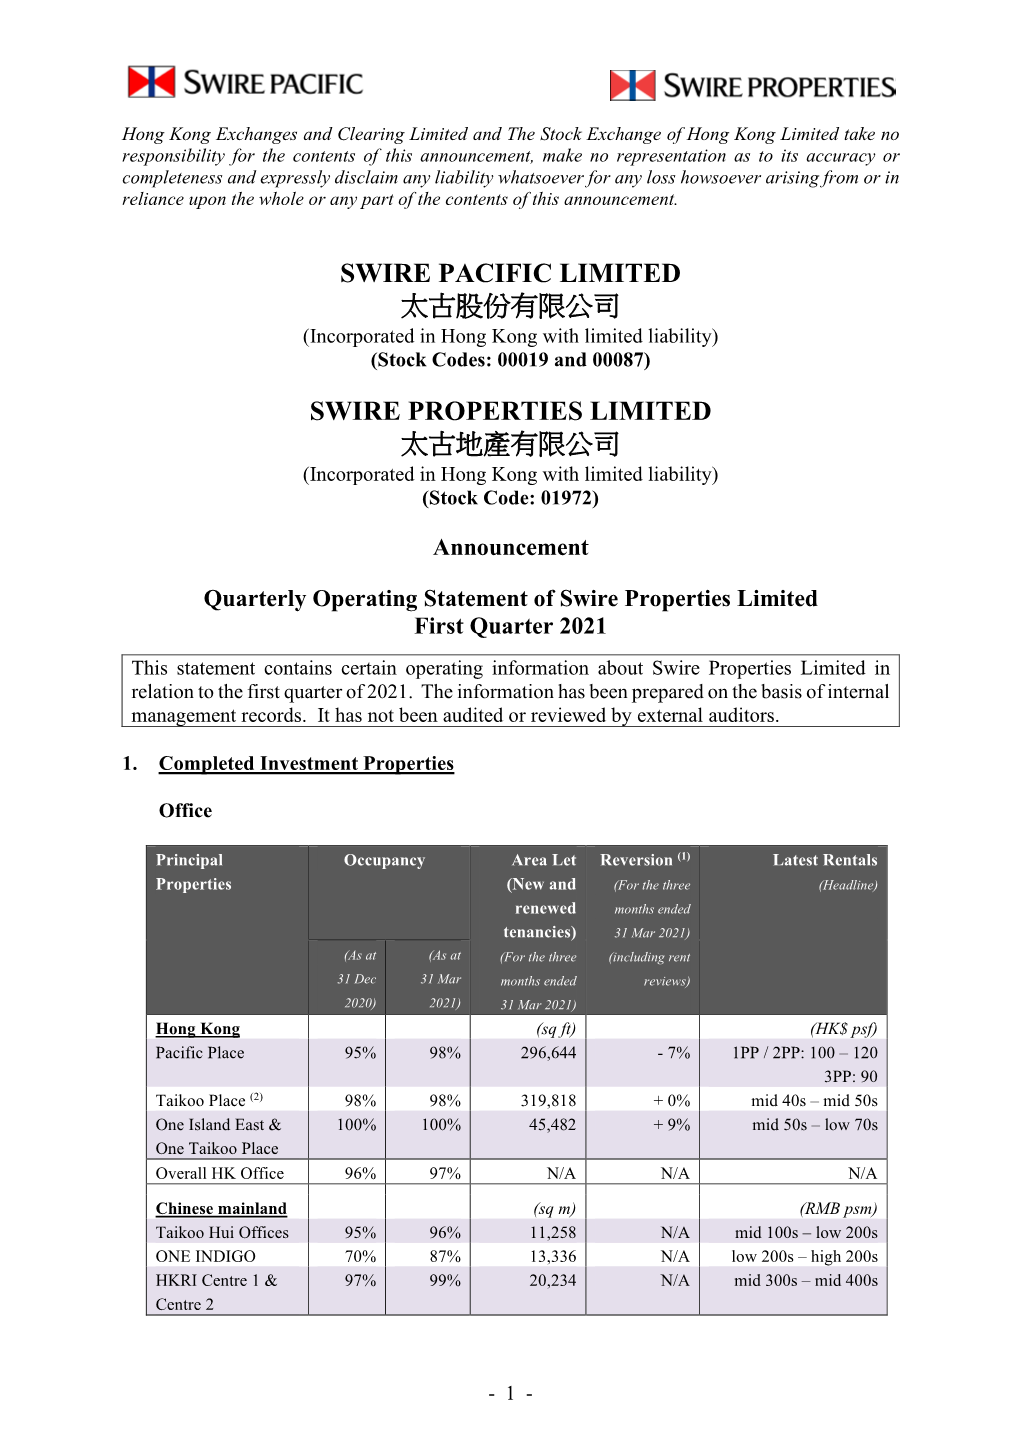 Quarterly Operating Statement of Swire Properties Limited First Quarter 2021